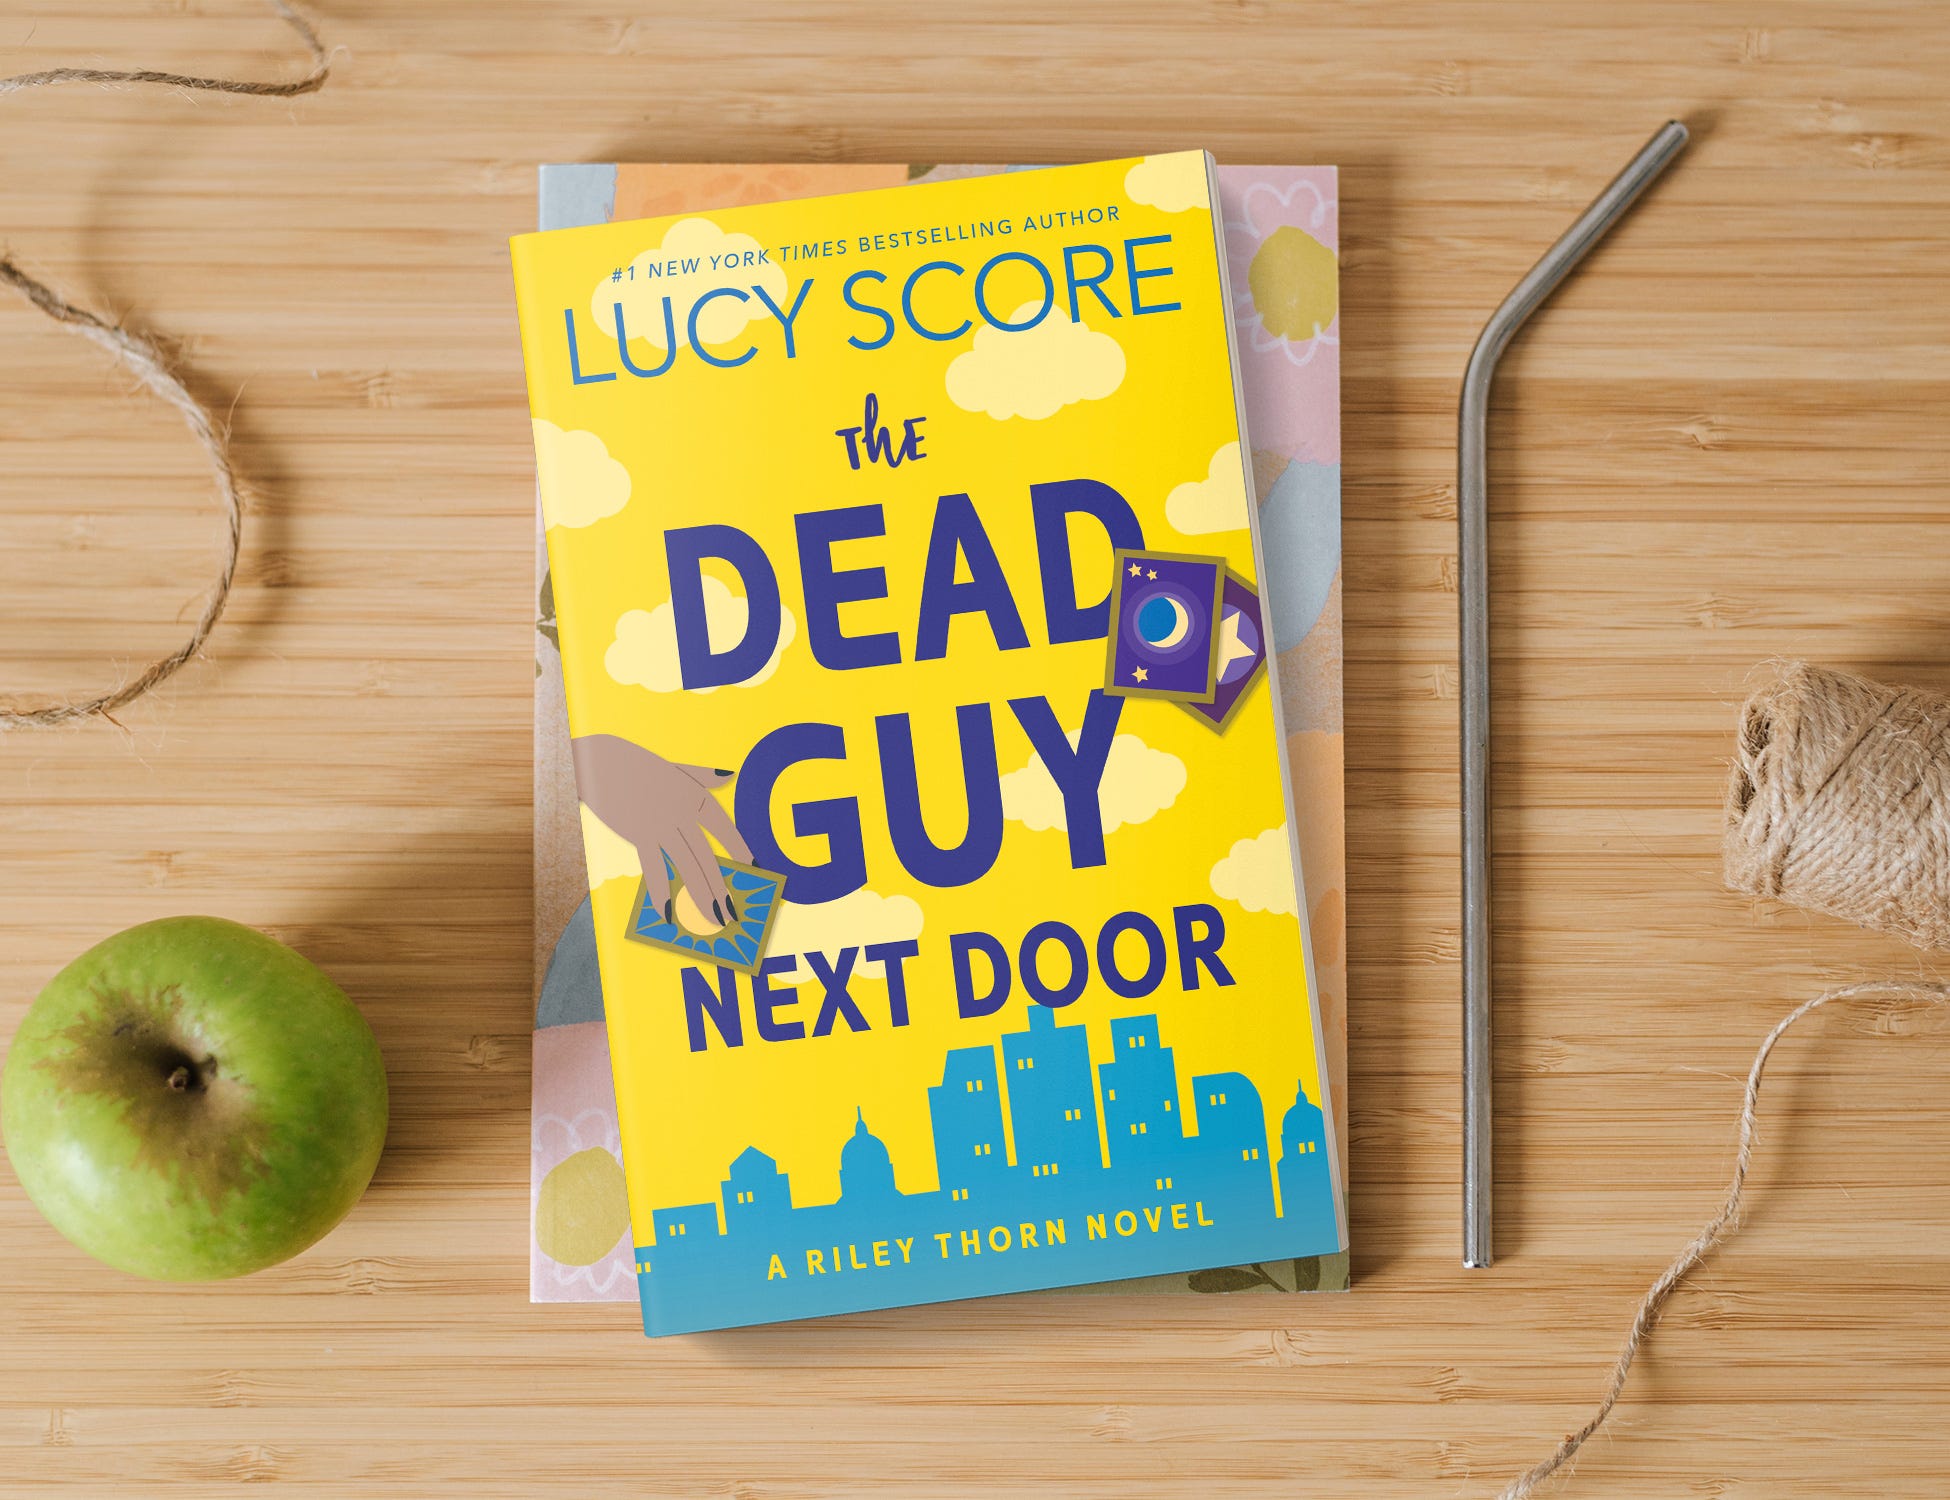 Image of The Dead Guy Next Door by Lucy Score book on a wood table next to a straw, a green apple, and string